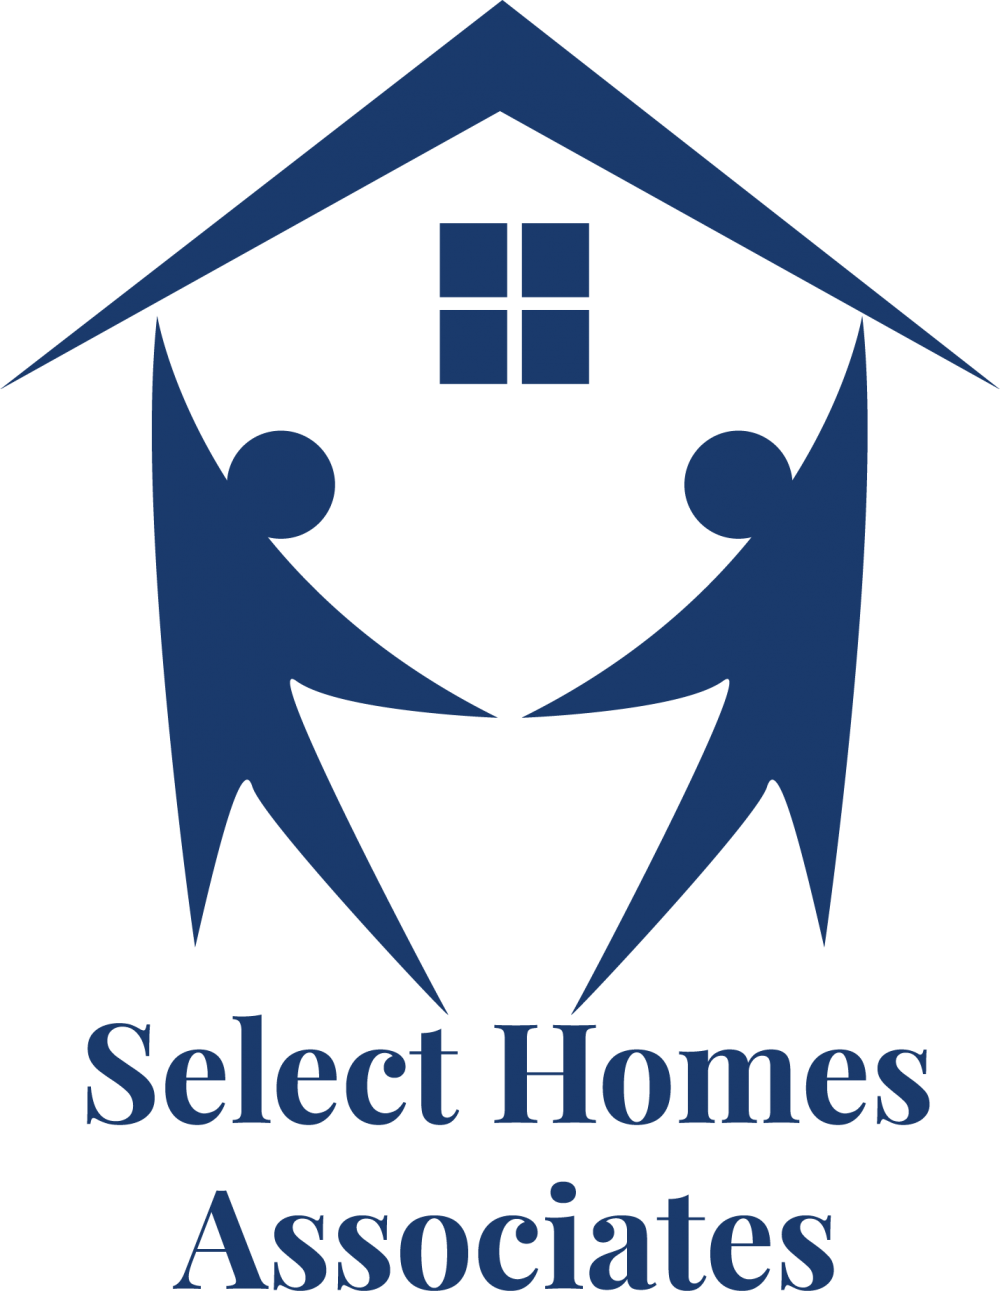 Realestate Agent Rizwan Shahid working in Realestate Agency Select Homes Associates